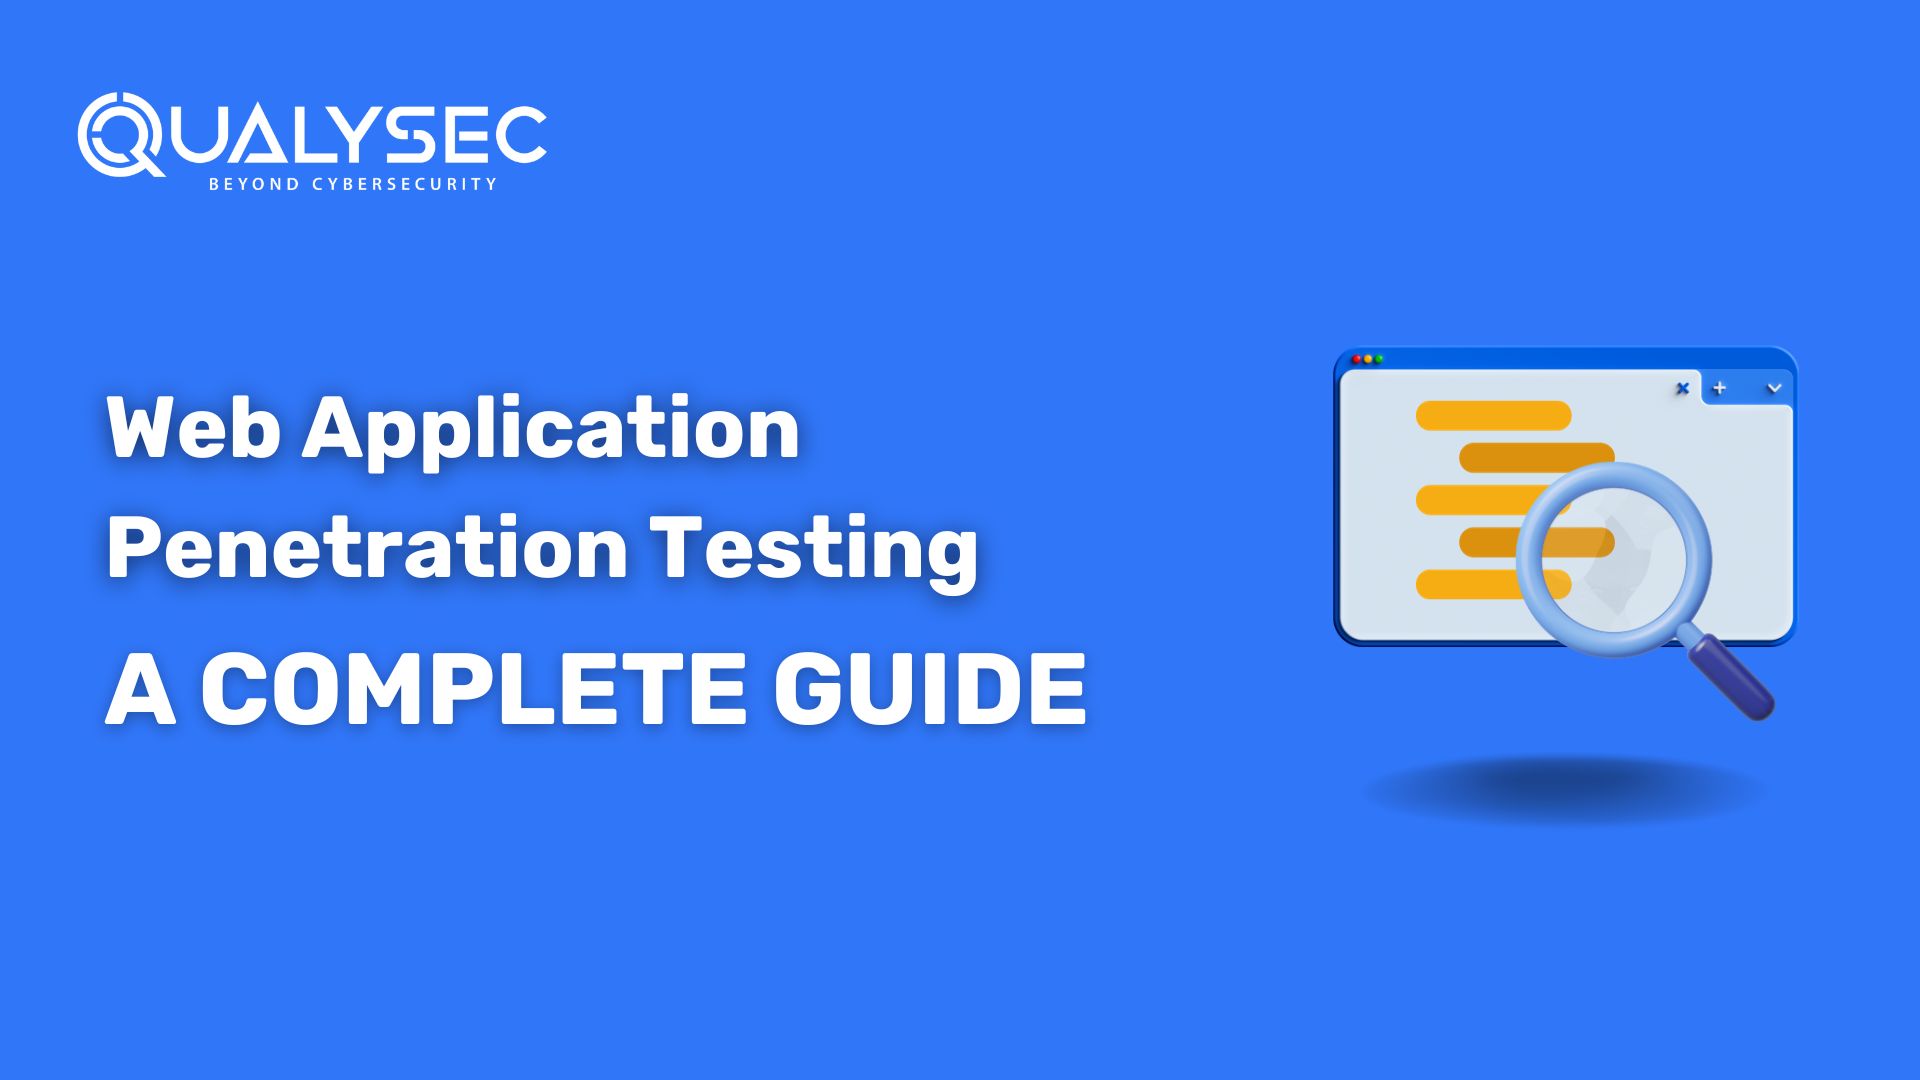 Guide to ZAP Application Security Testing